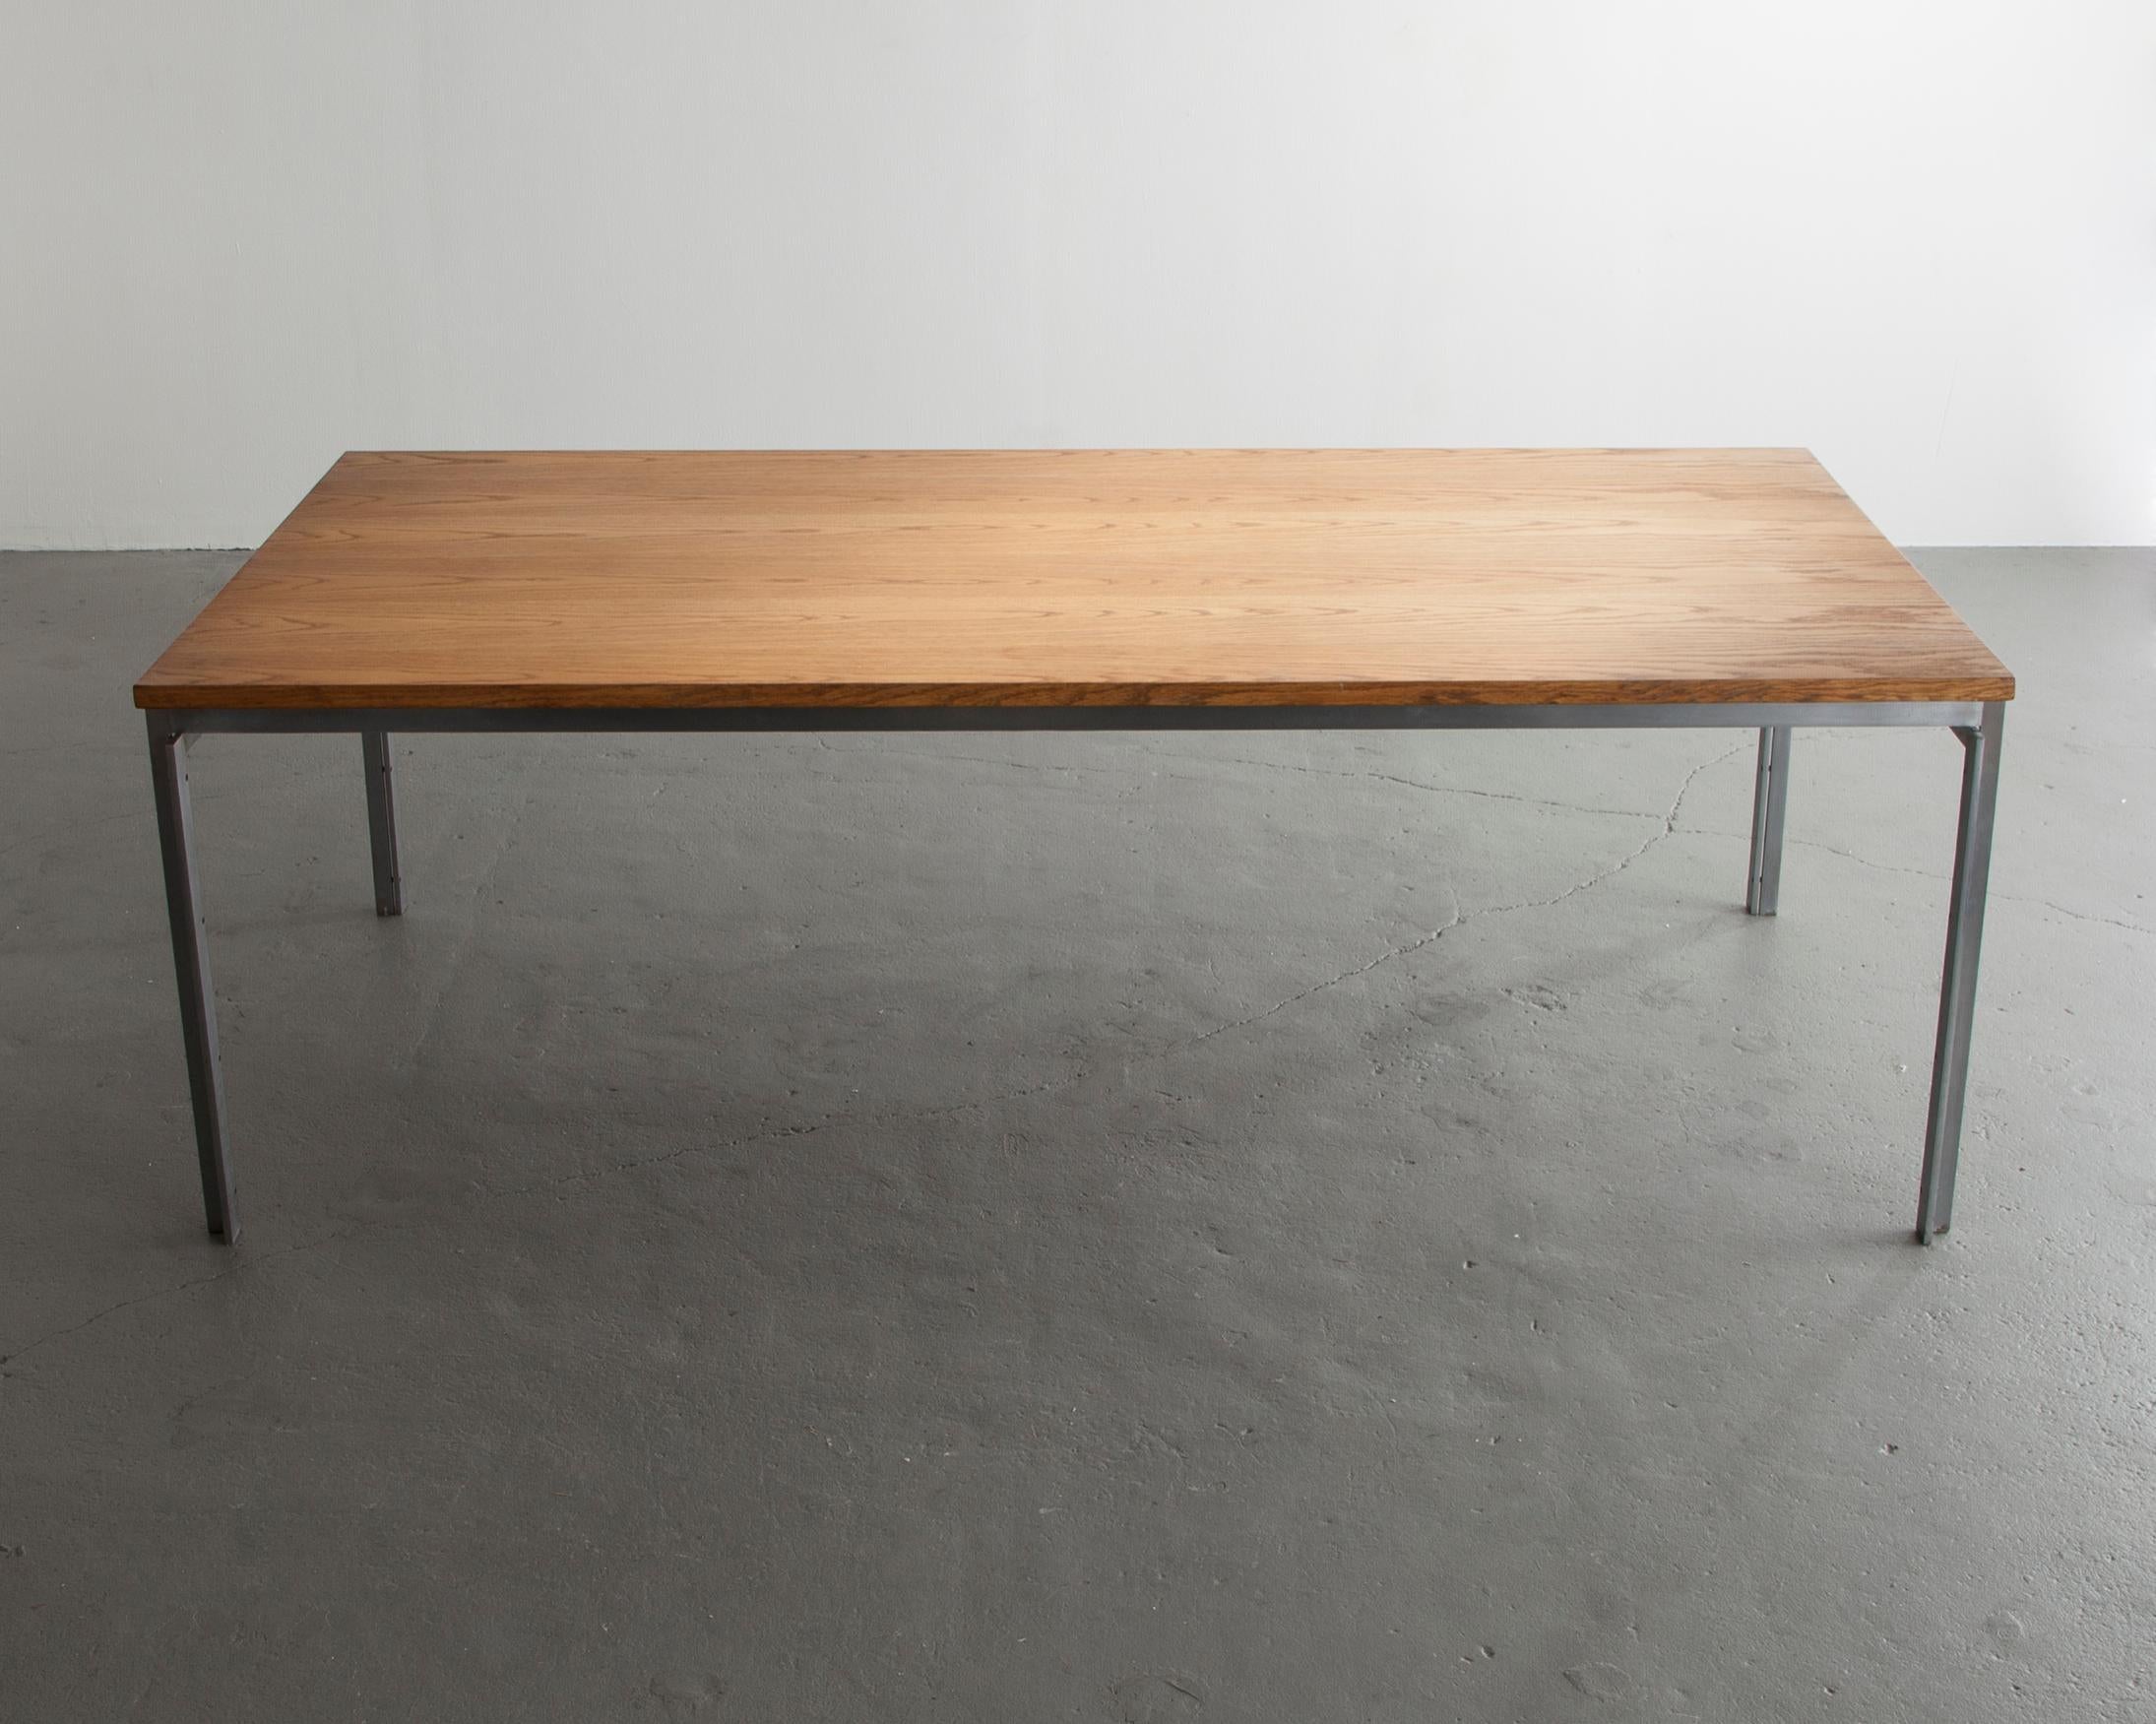 Danish PK 55 Table with Matte, Chrome-Plated Steel and Ash Top by Poul Kjaerholm, 1982